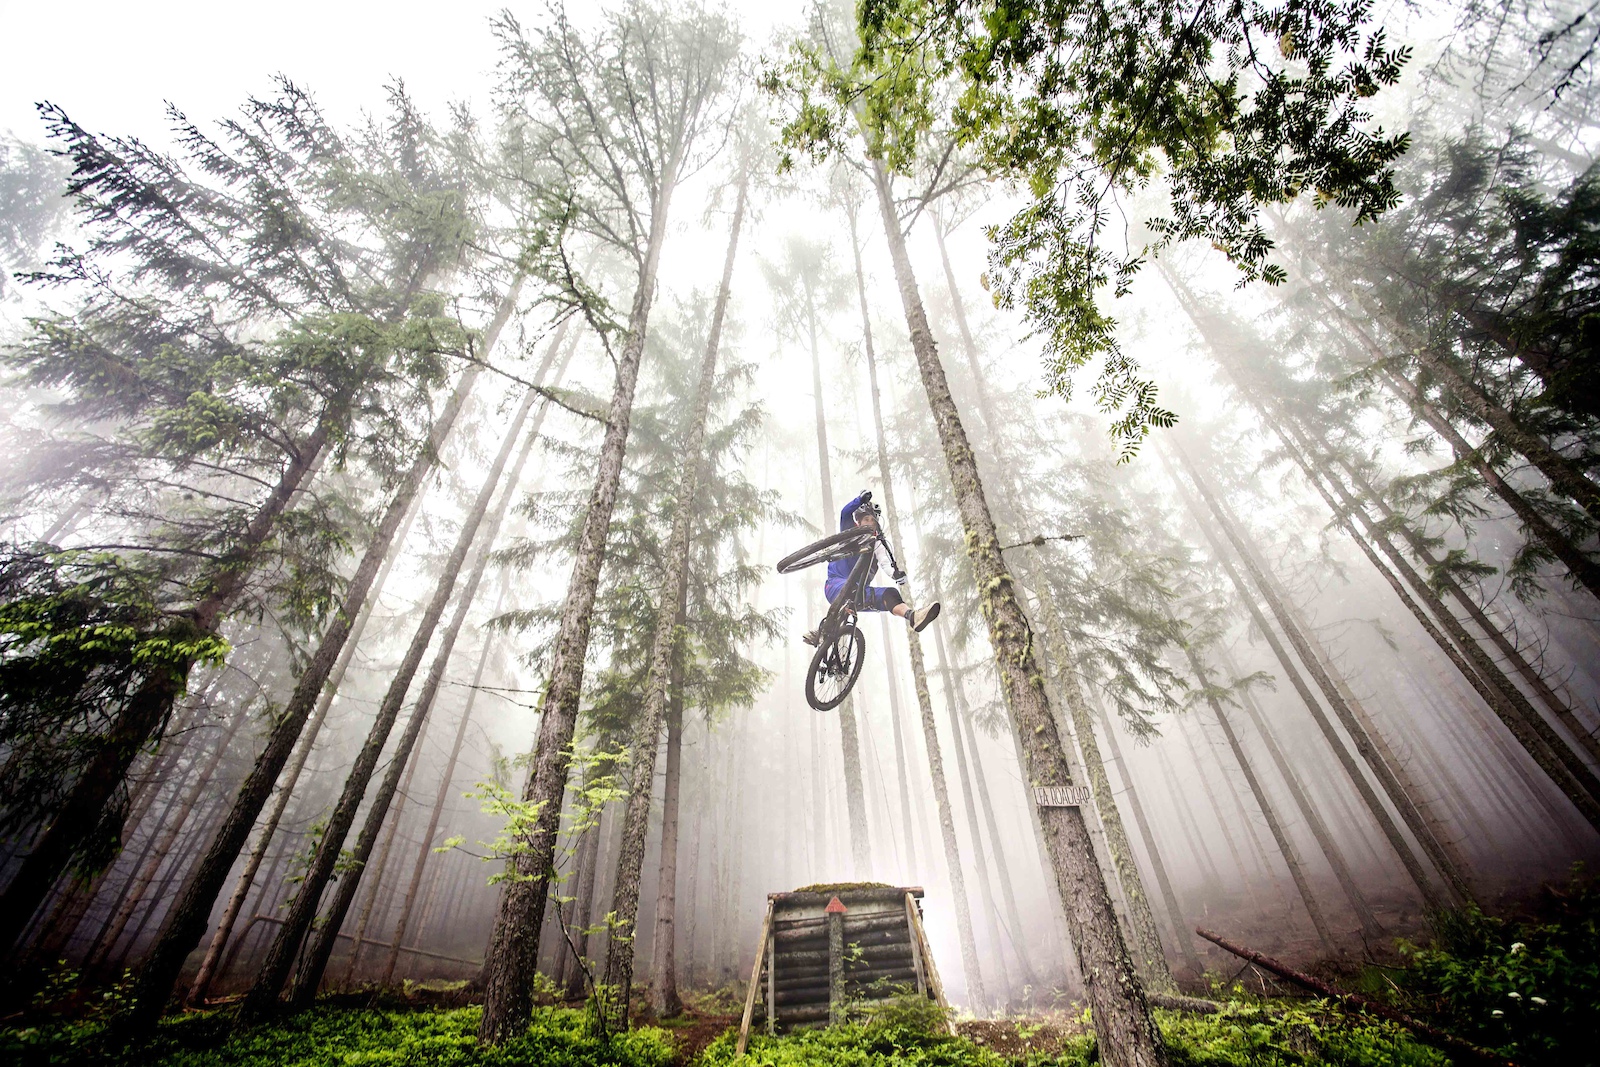 foggy one- footer in a deep fairy tale forest